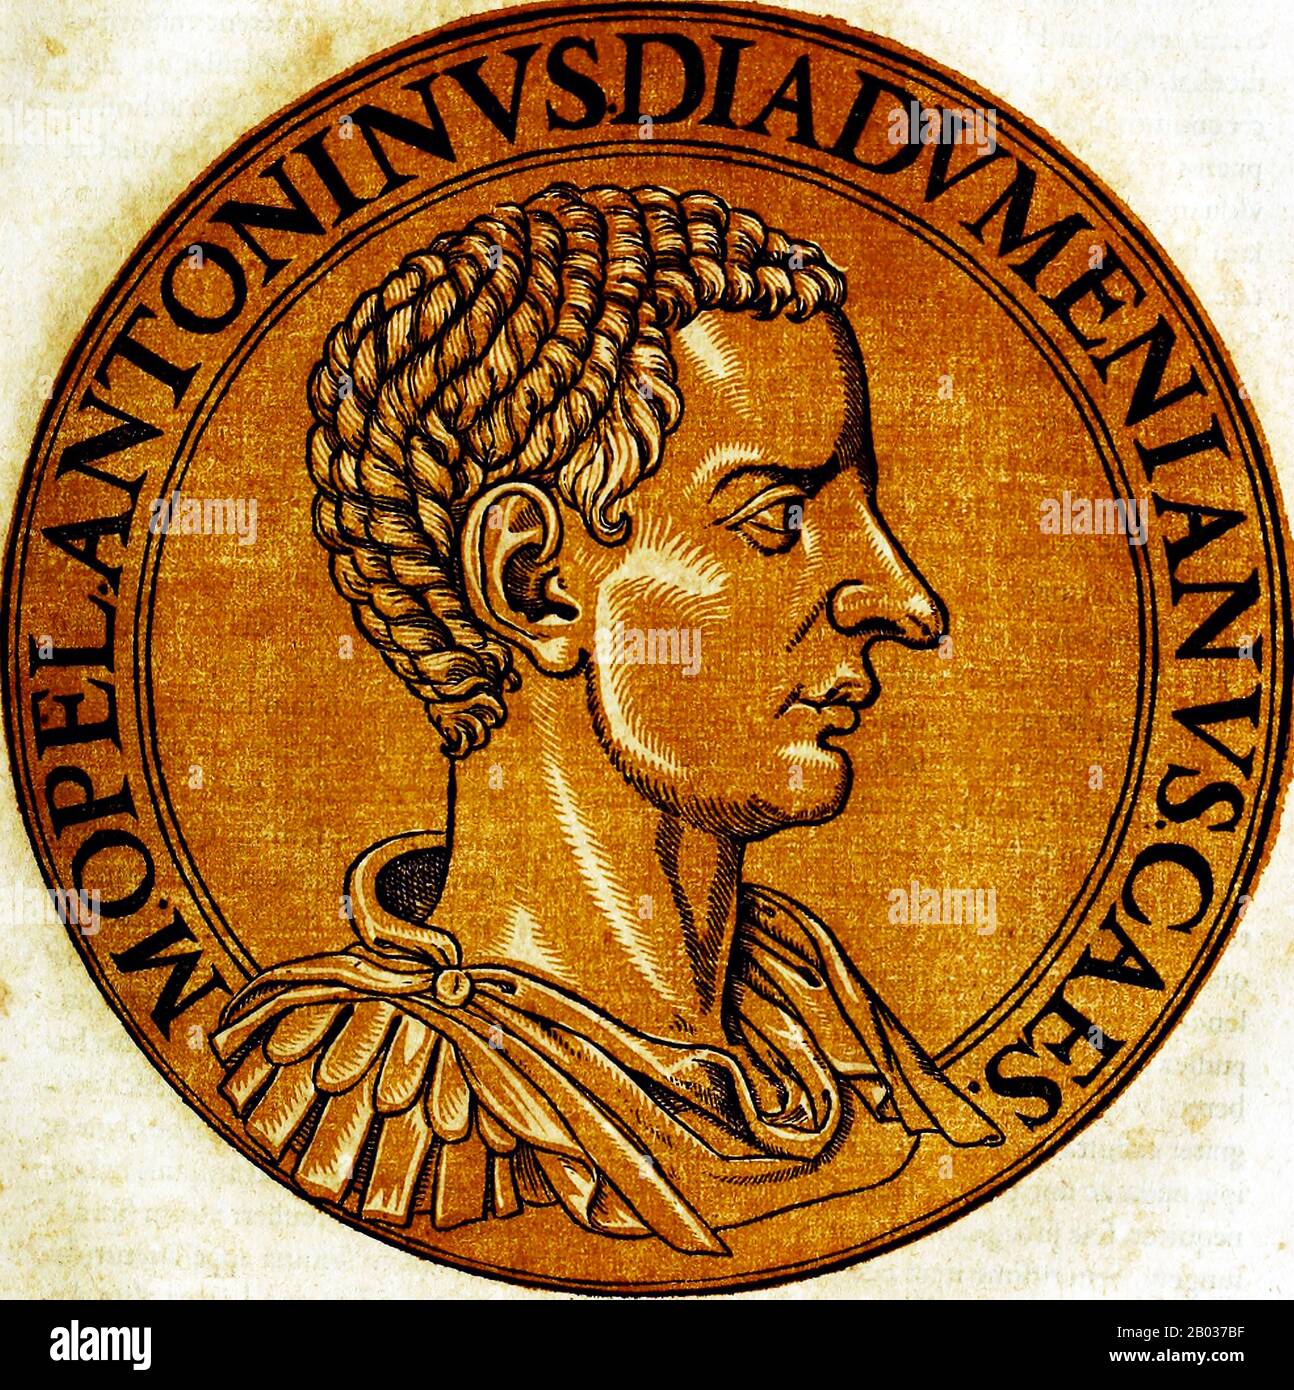 Diadumenian (208-218) was the son of Emperor Macrinus, and was so named due to being born with a caul that formed a 'diadem'. He was said to have shared his birthday with that of beloved Emperor Antoninus Pius. He at first served his father briefly as Caesar, before being elevated to Augustus and co-emperor in 218.  Unfortunately, the ten-year-old co-emperor had little time to enjoy his position or learn from it as the Syrian legions revolted and proclaimed Elagabus as emperor. When Macrinus was defeated and executed in June of 218, Diadumenian's death soon followed. Stock Photo